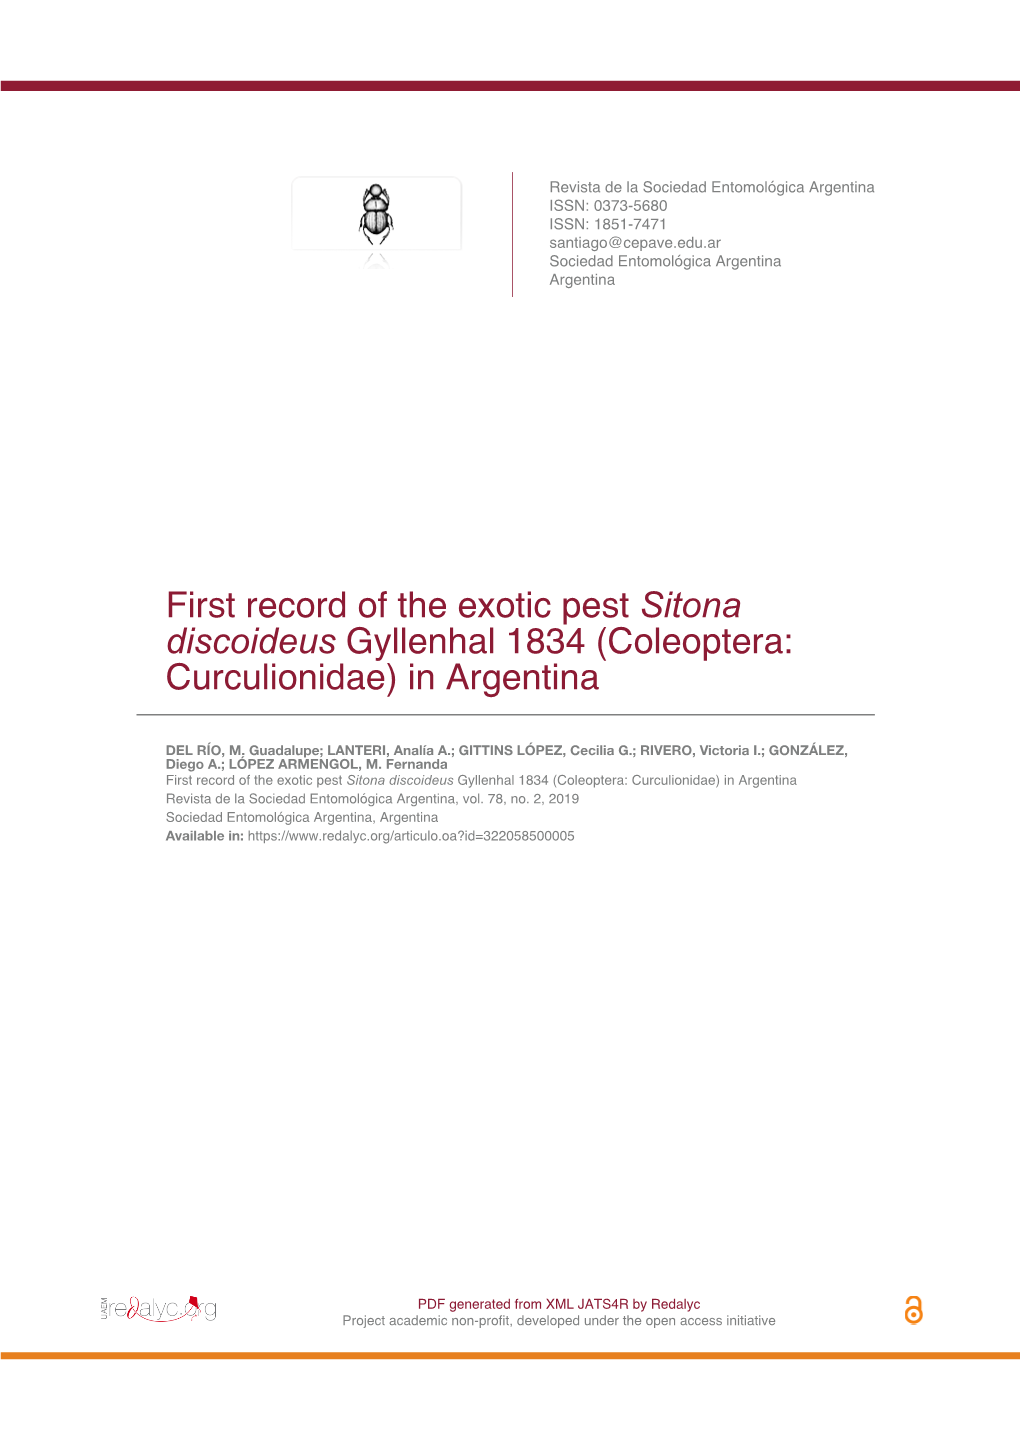 First Record of the Exotic Pest Sitona Discoideus Gyllenhal 1834 (Coleoptera: Curculionidae) in Argentina